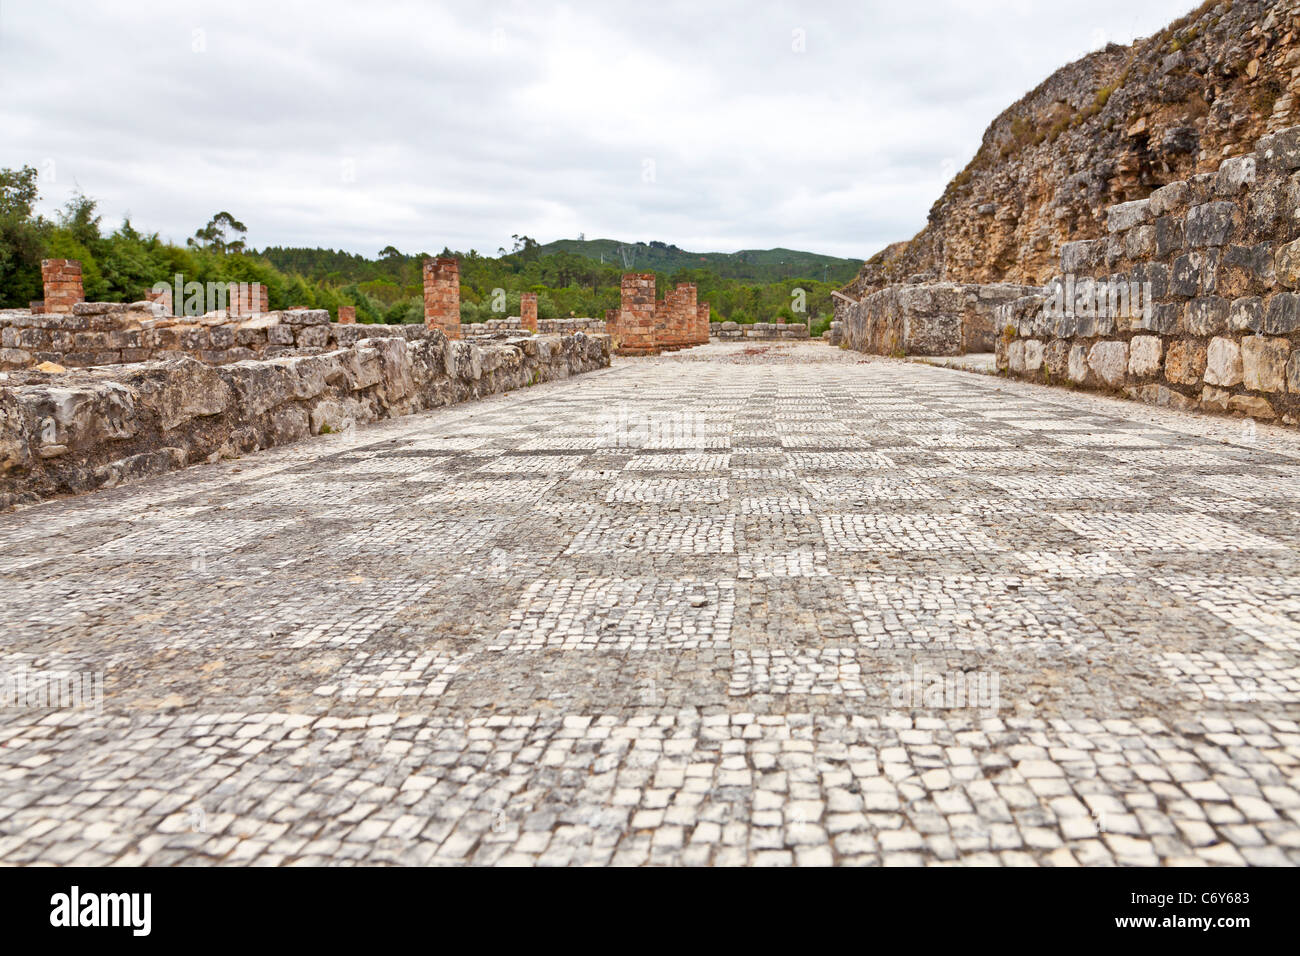 Mosaics in the House of the Swastika Villa in Conimbriga, the best preserved Roman city ruins in Portugal. Stock Photo